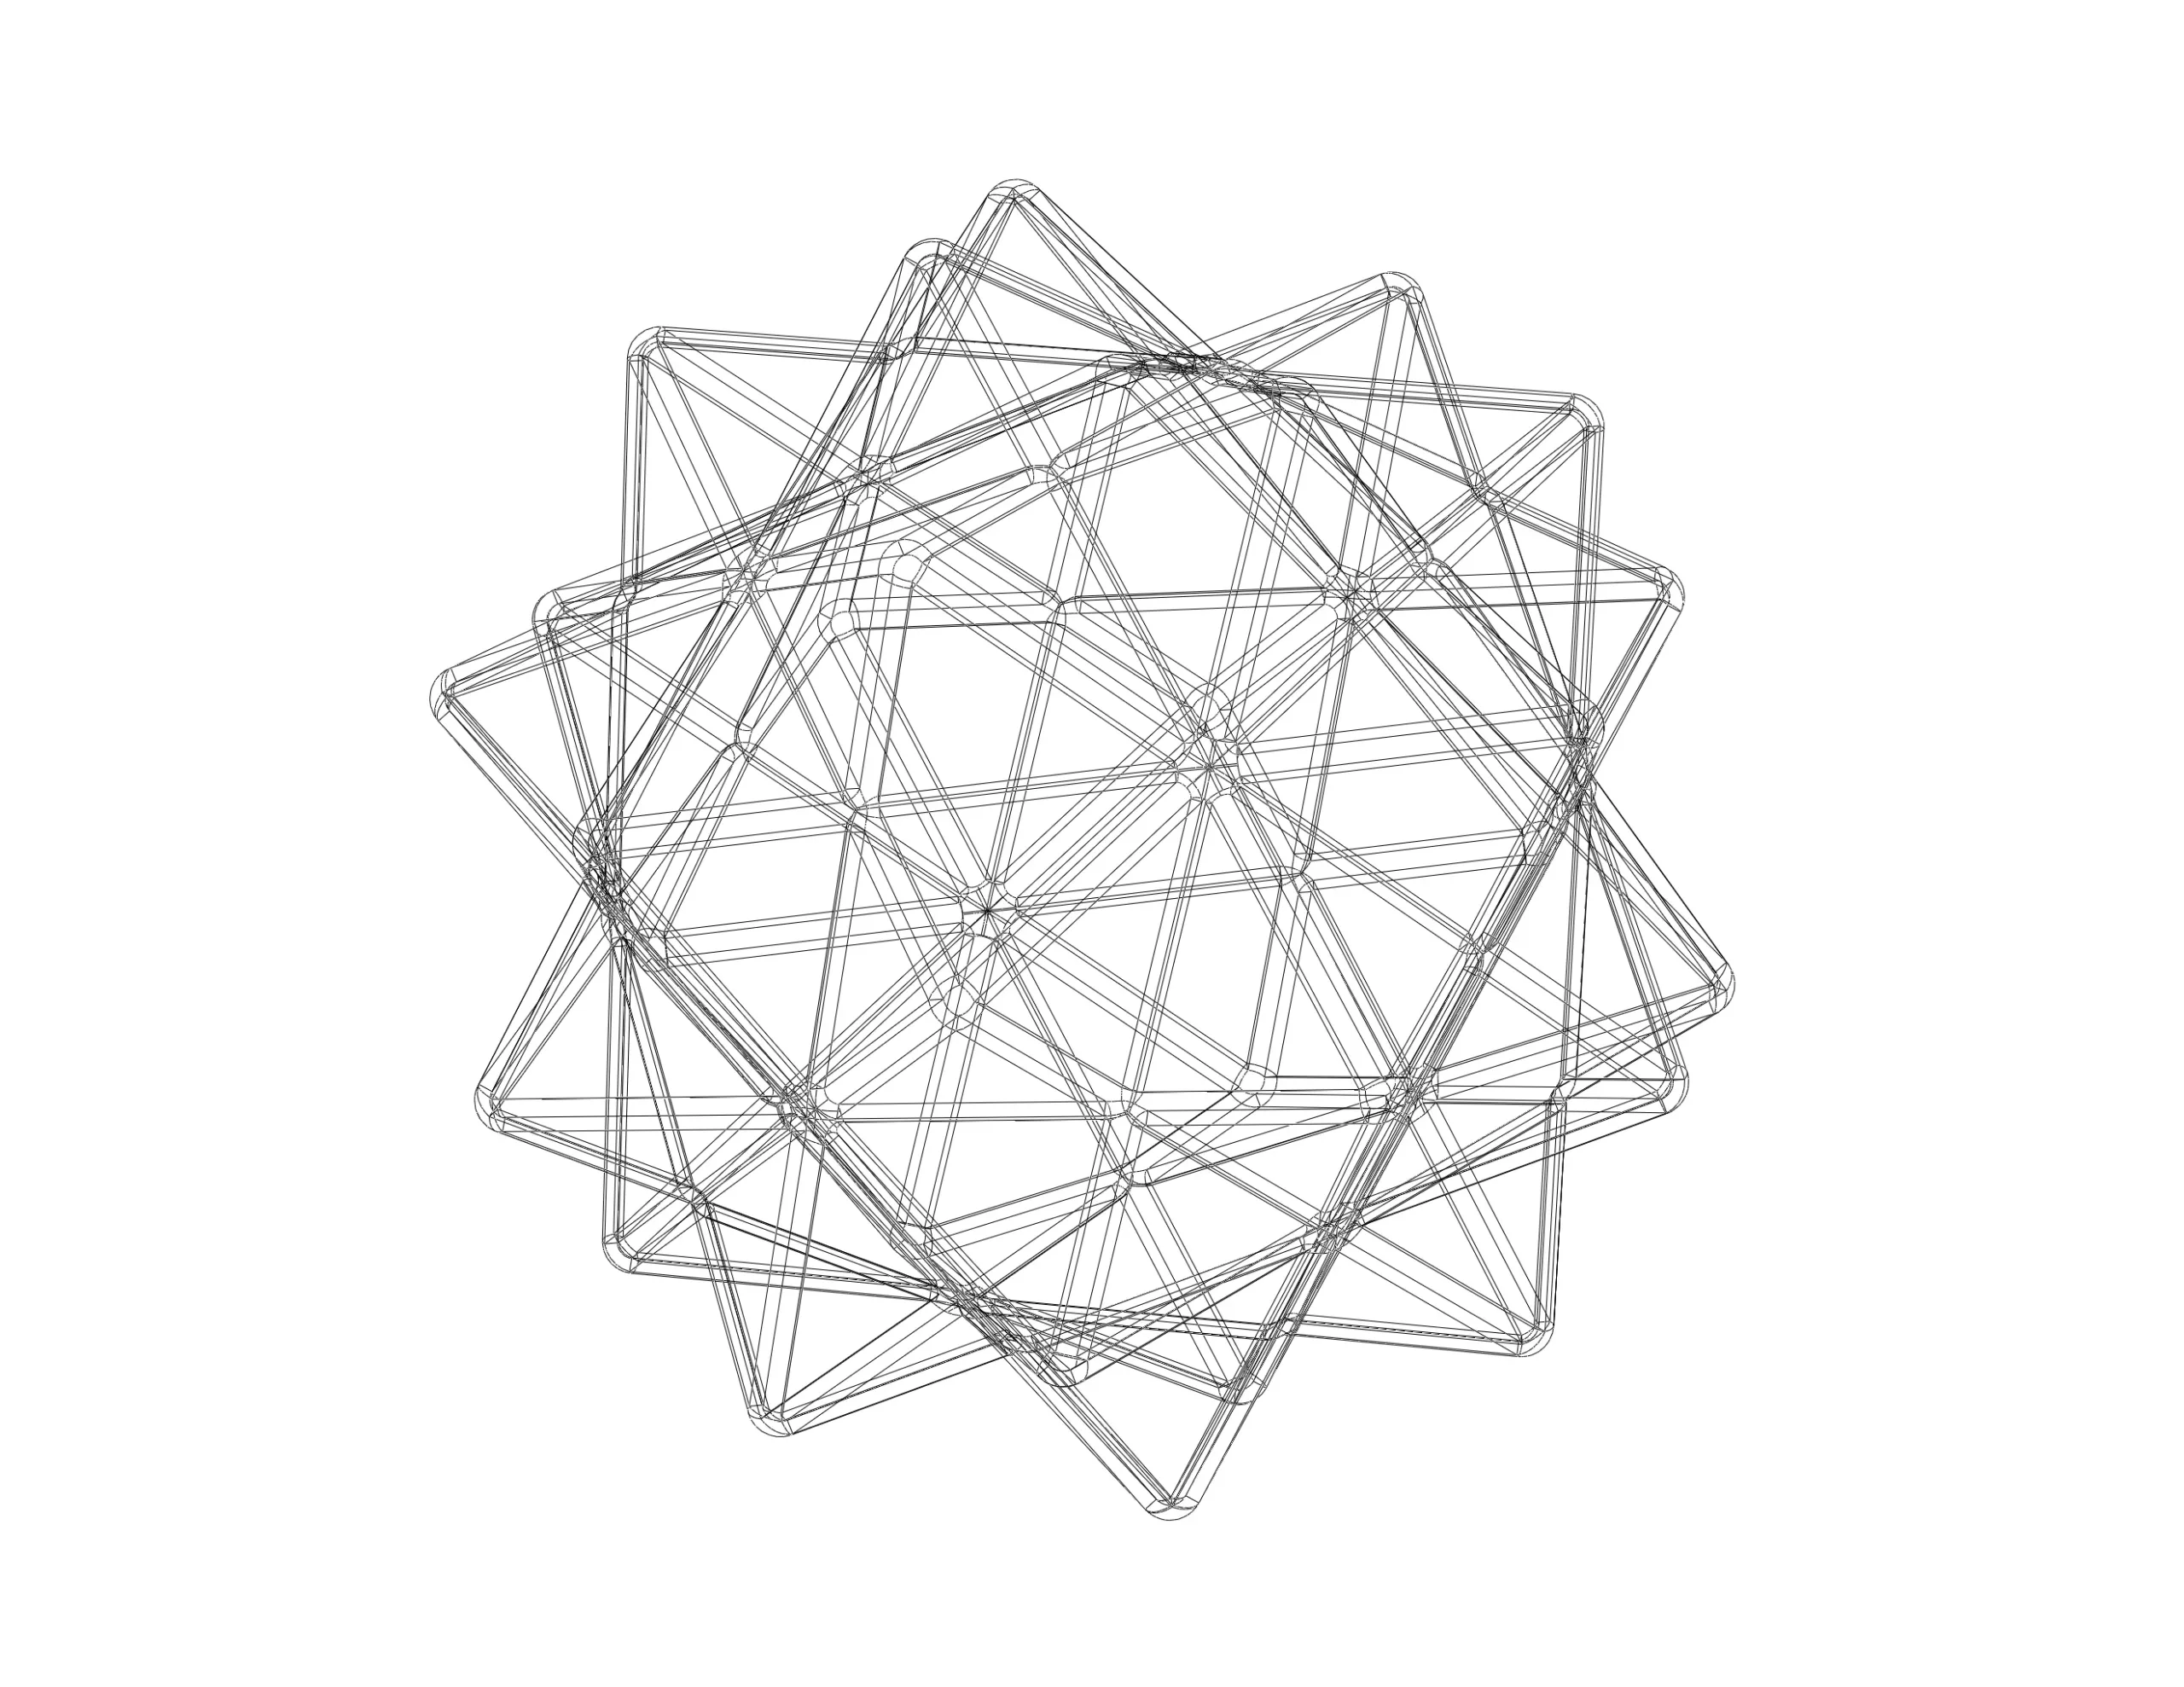 Wireframe Shape Compound of Five Octahedra